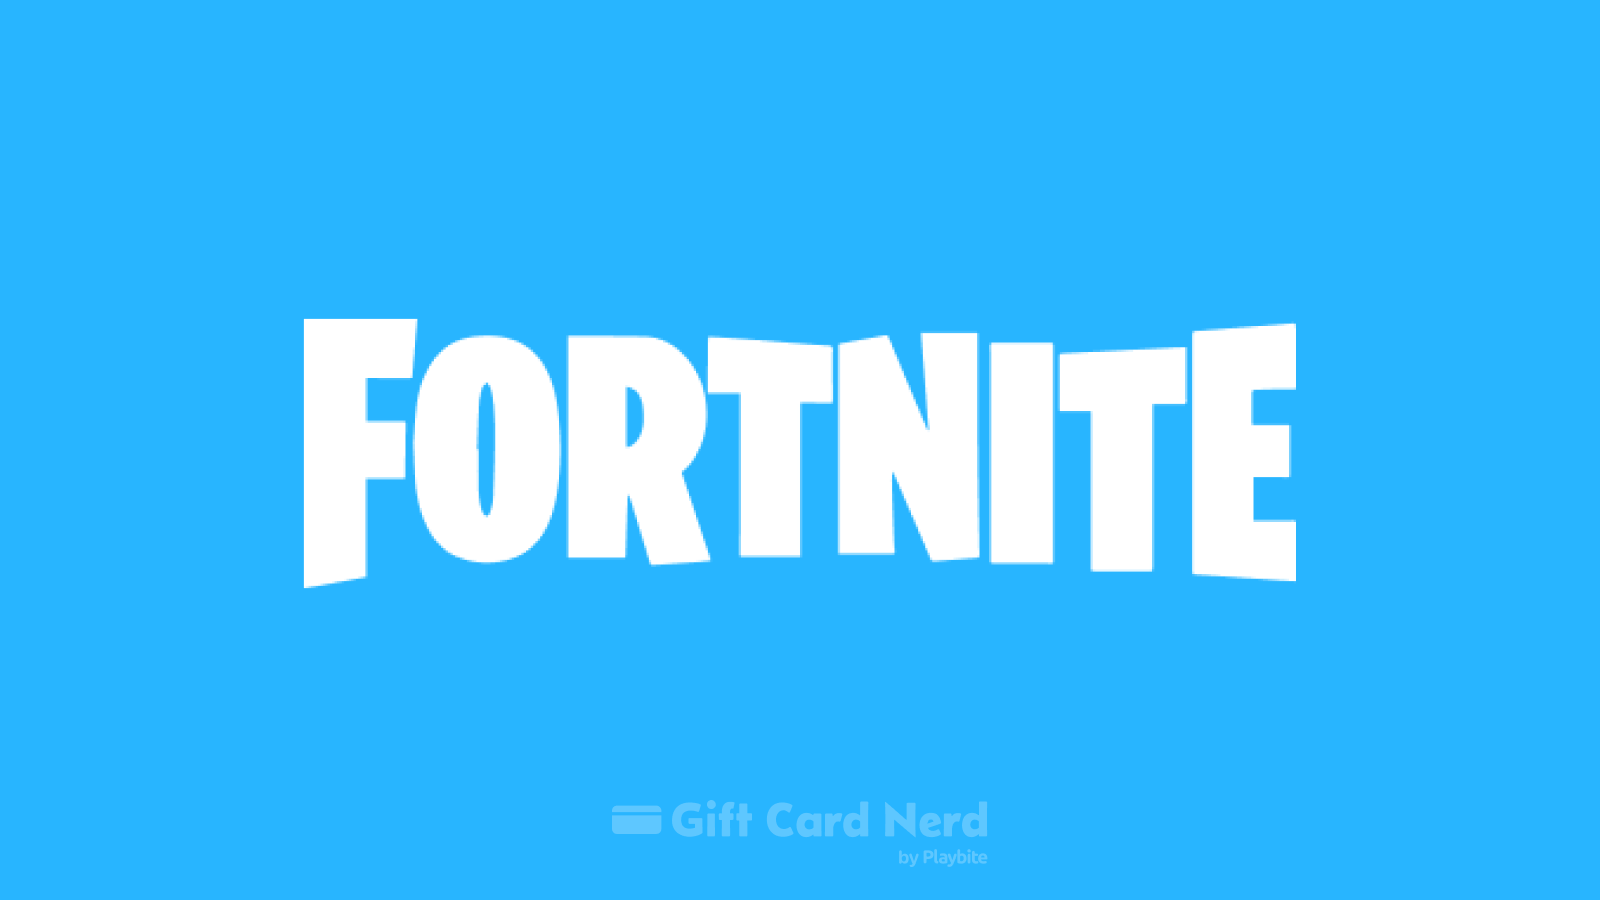 Can You Use a Fortnite Gift Card on Cash App?